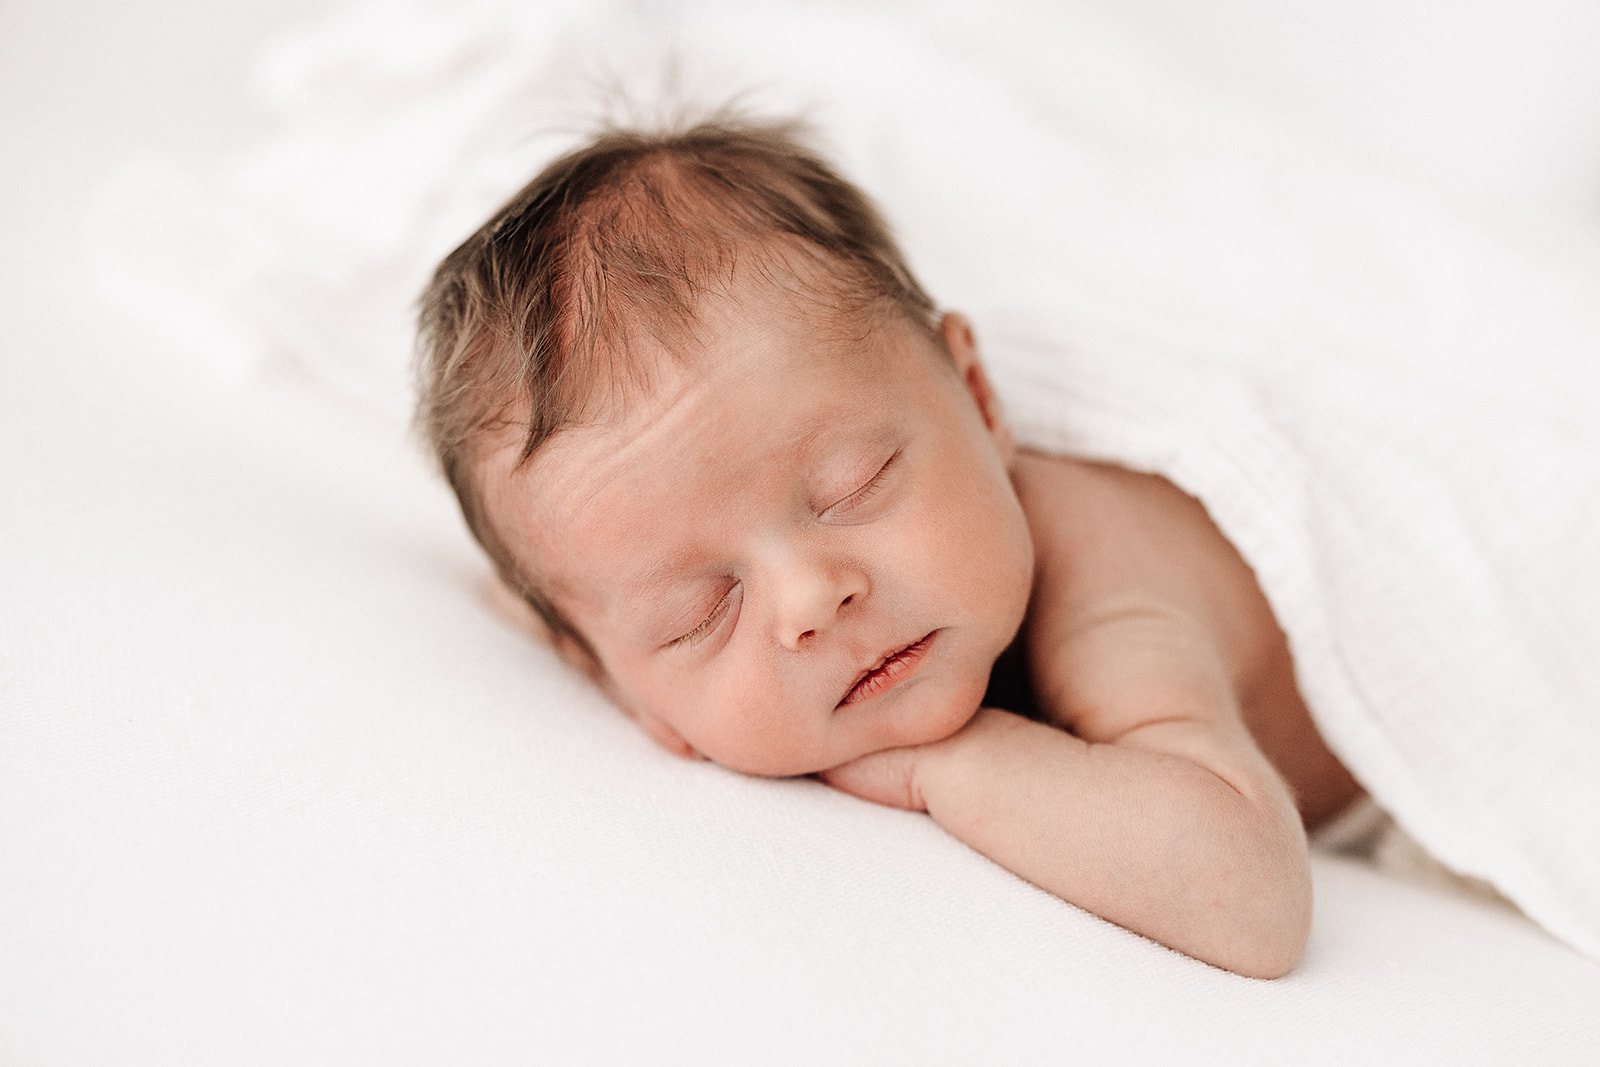 A newborn baby sleeps with its chin on its hand